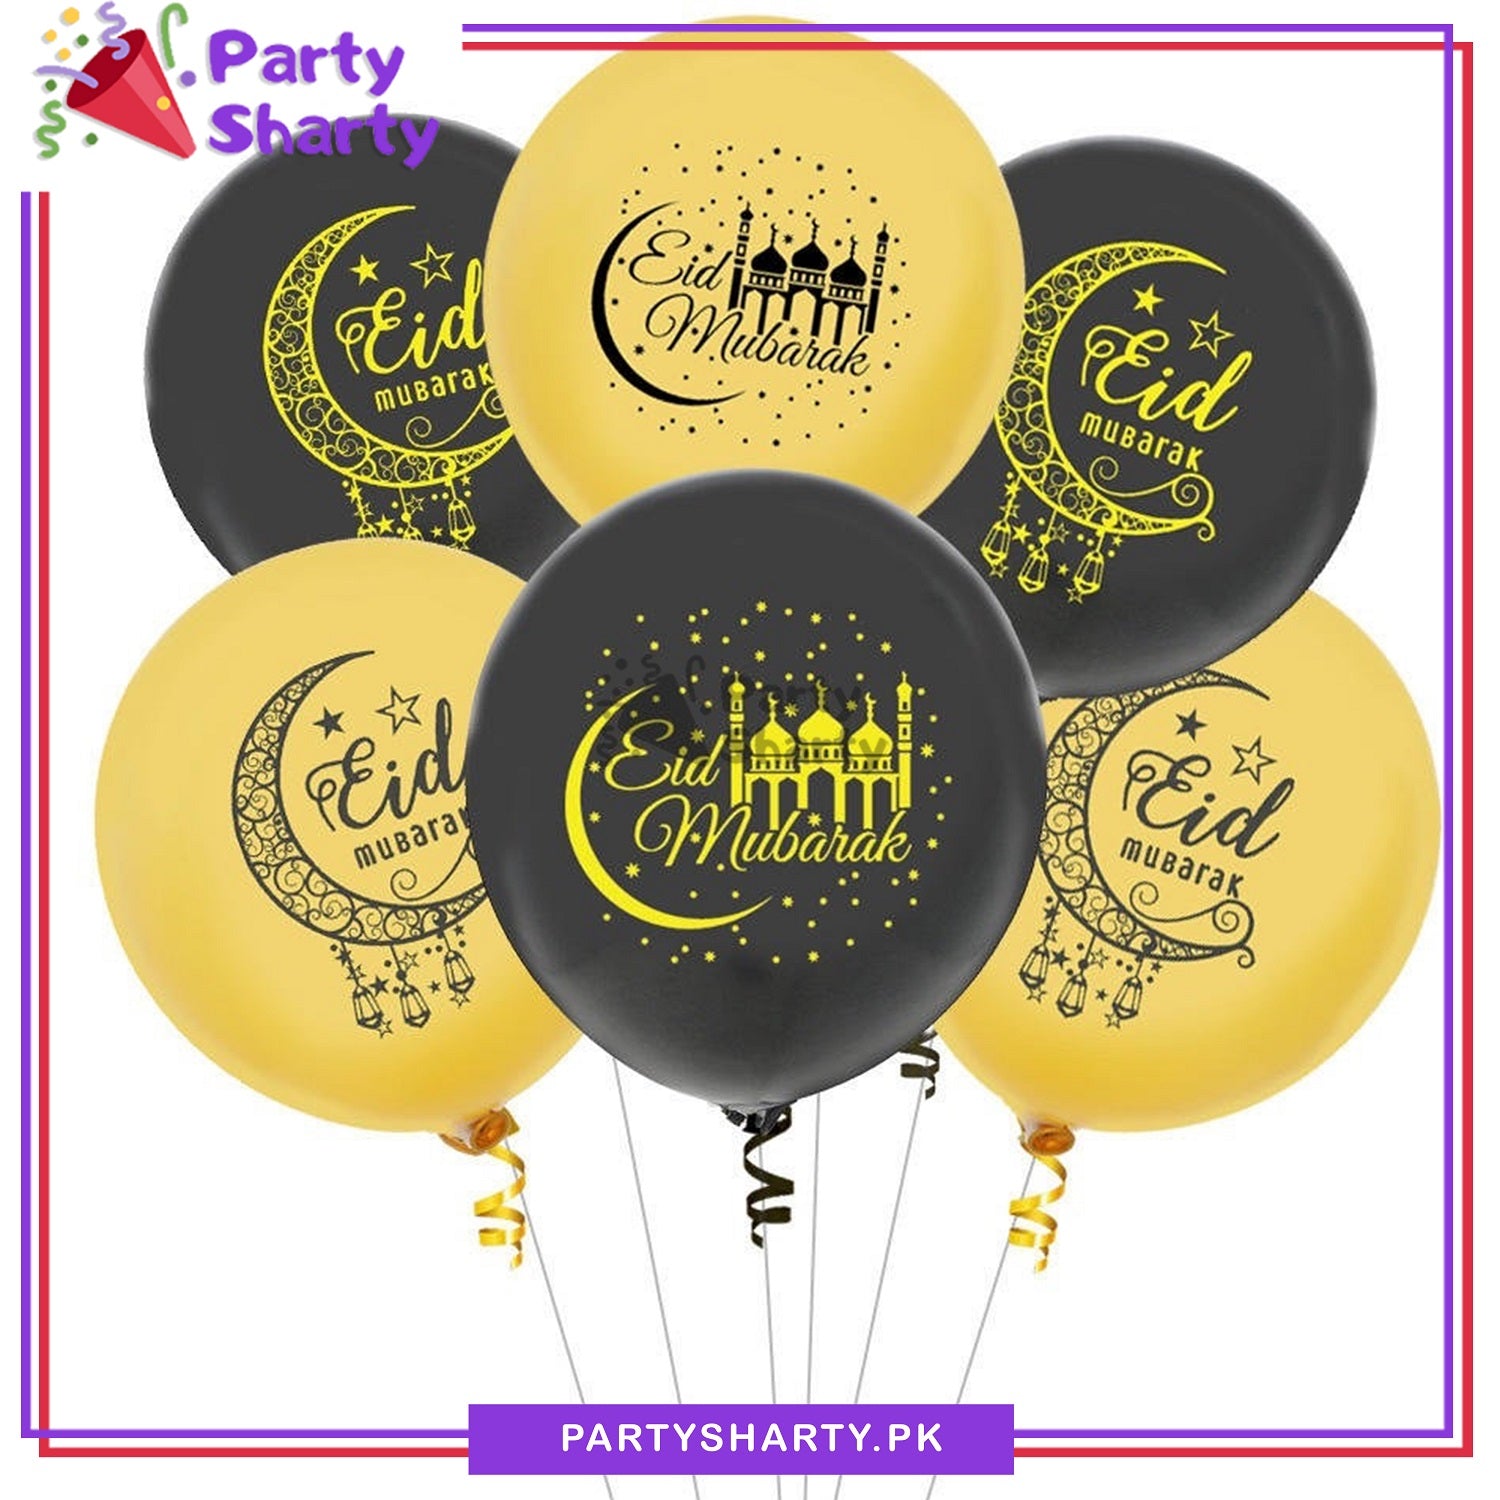 Eid Mubarak Printed Latex Balloons For Eid Milan Party Decoration and Celebration